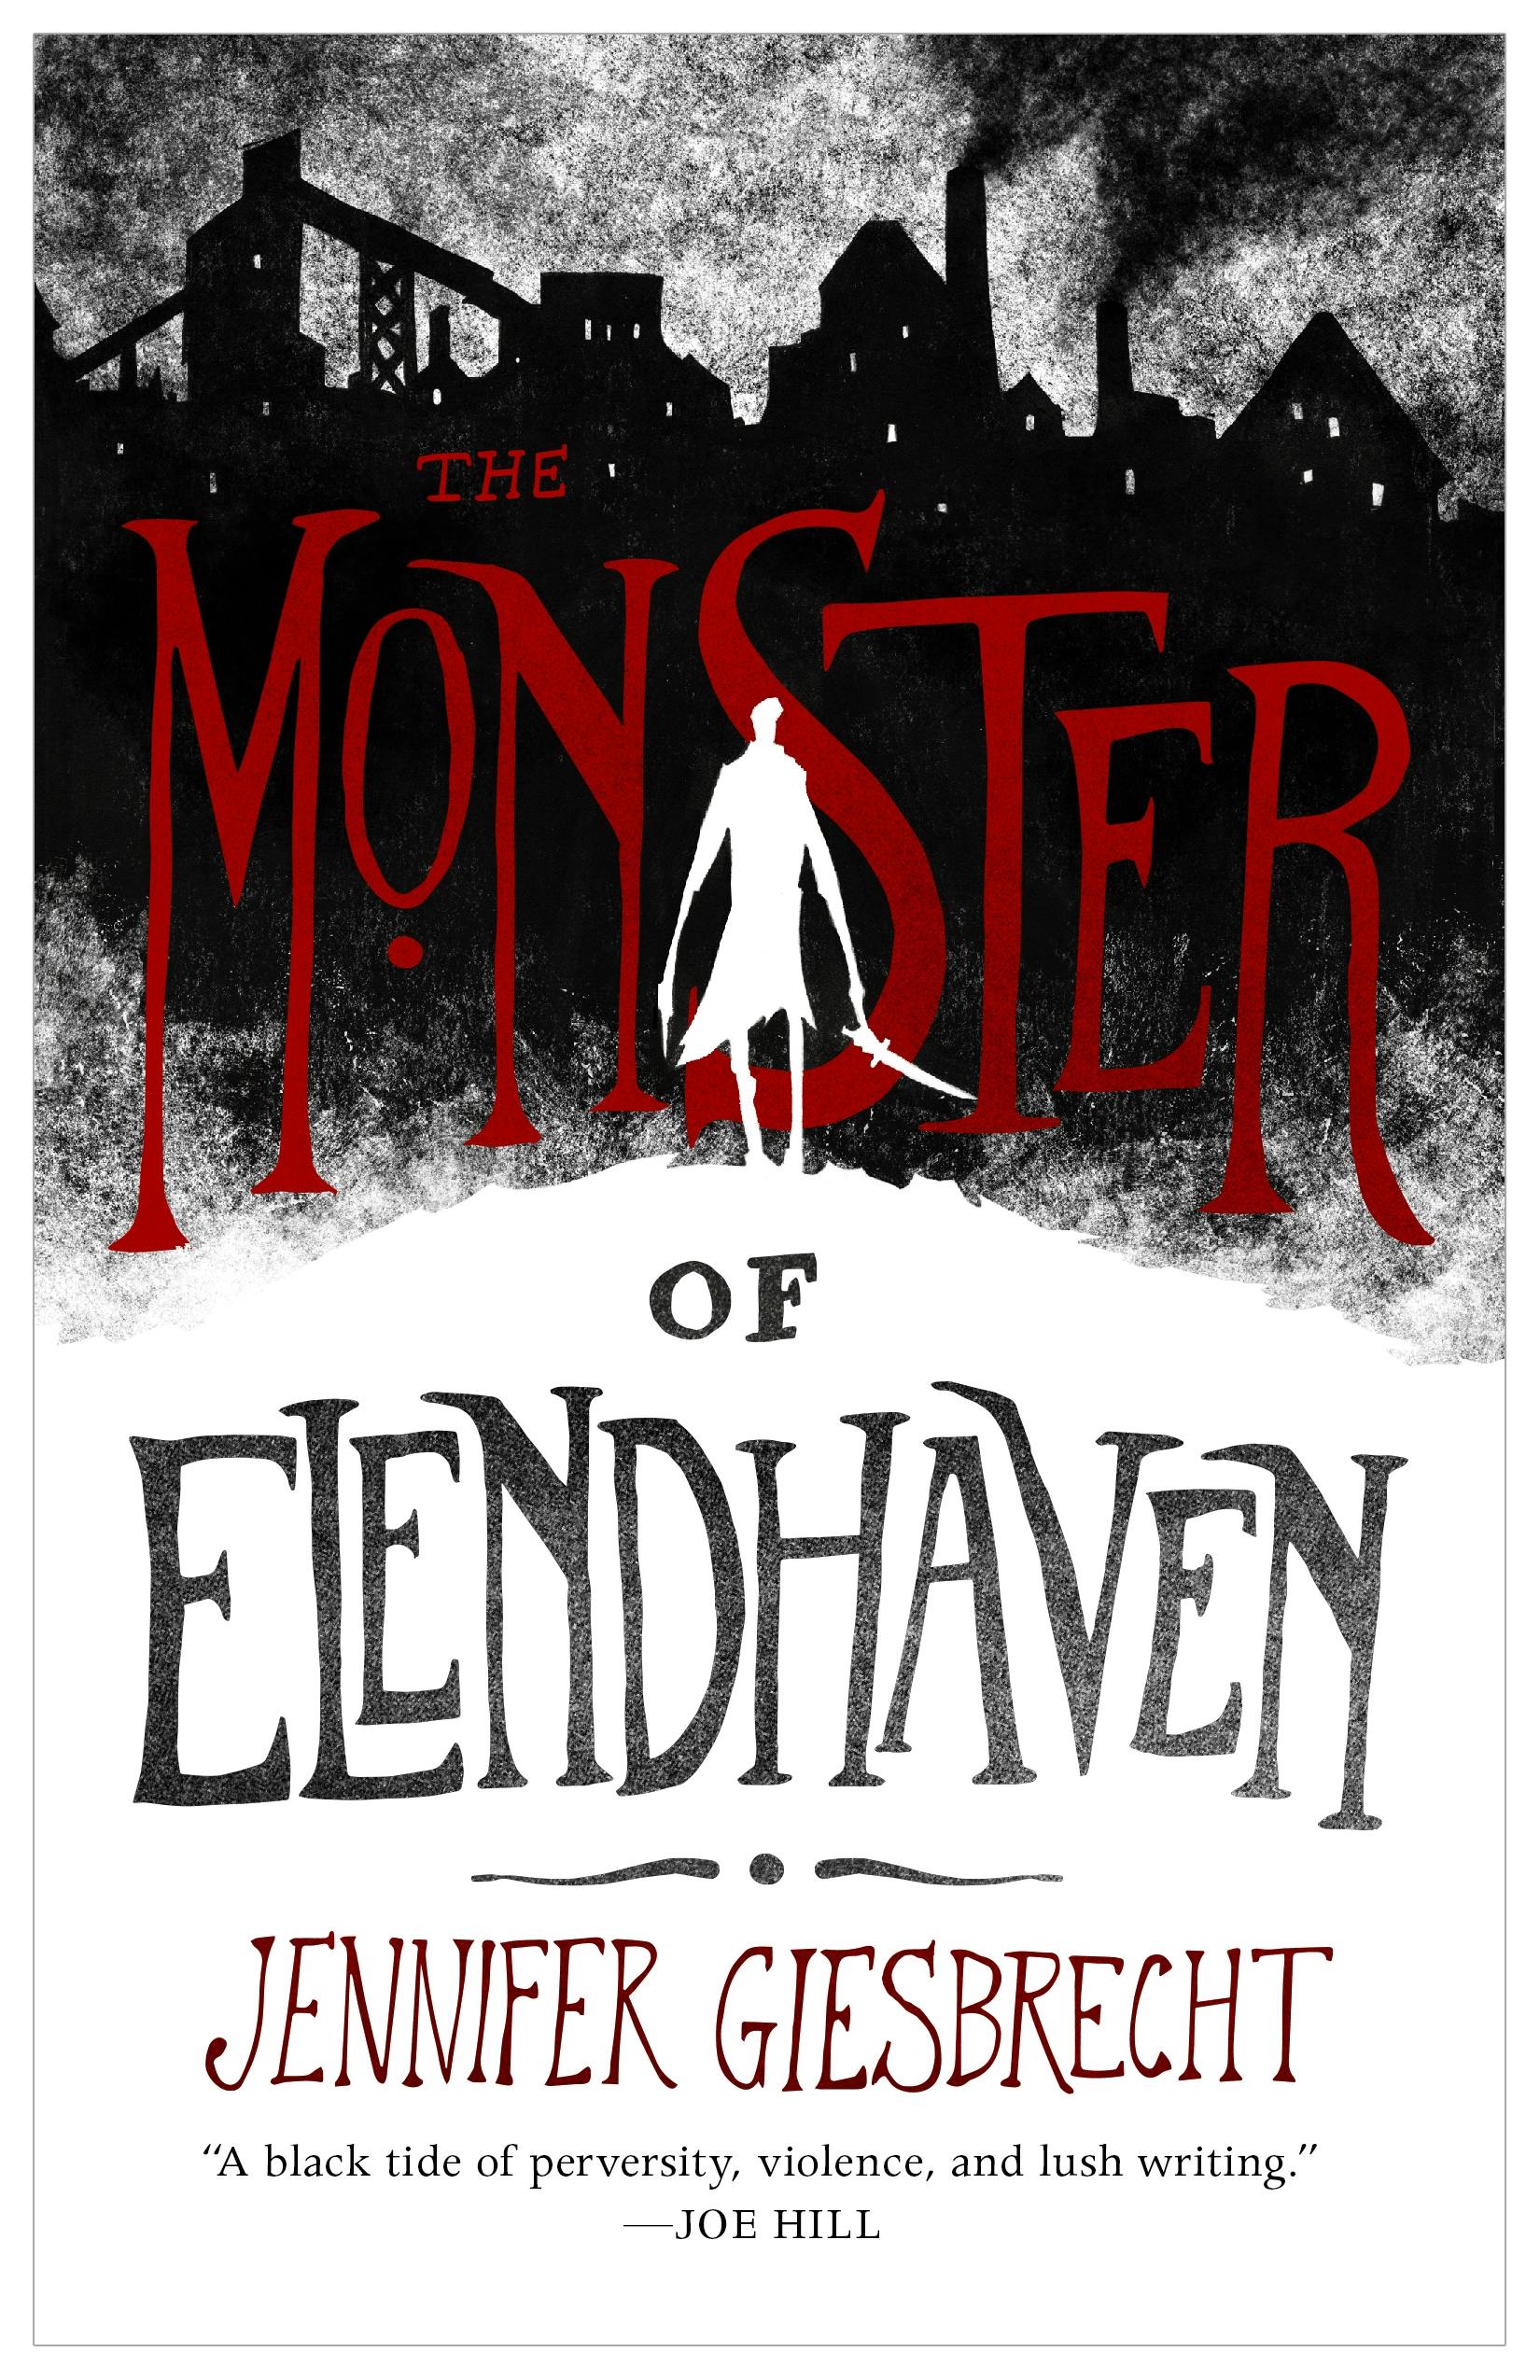 Cover for the book titled as: The Monster of Elendhaven